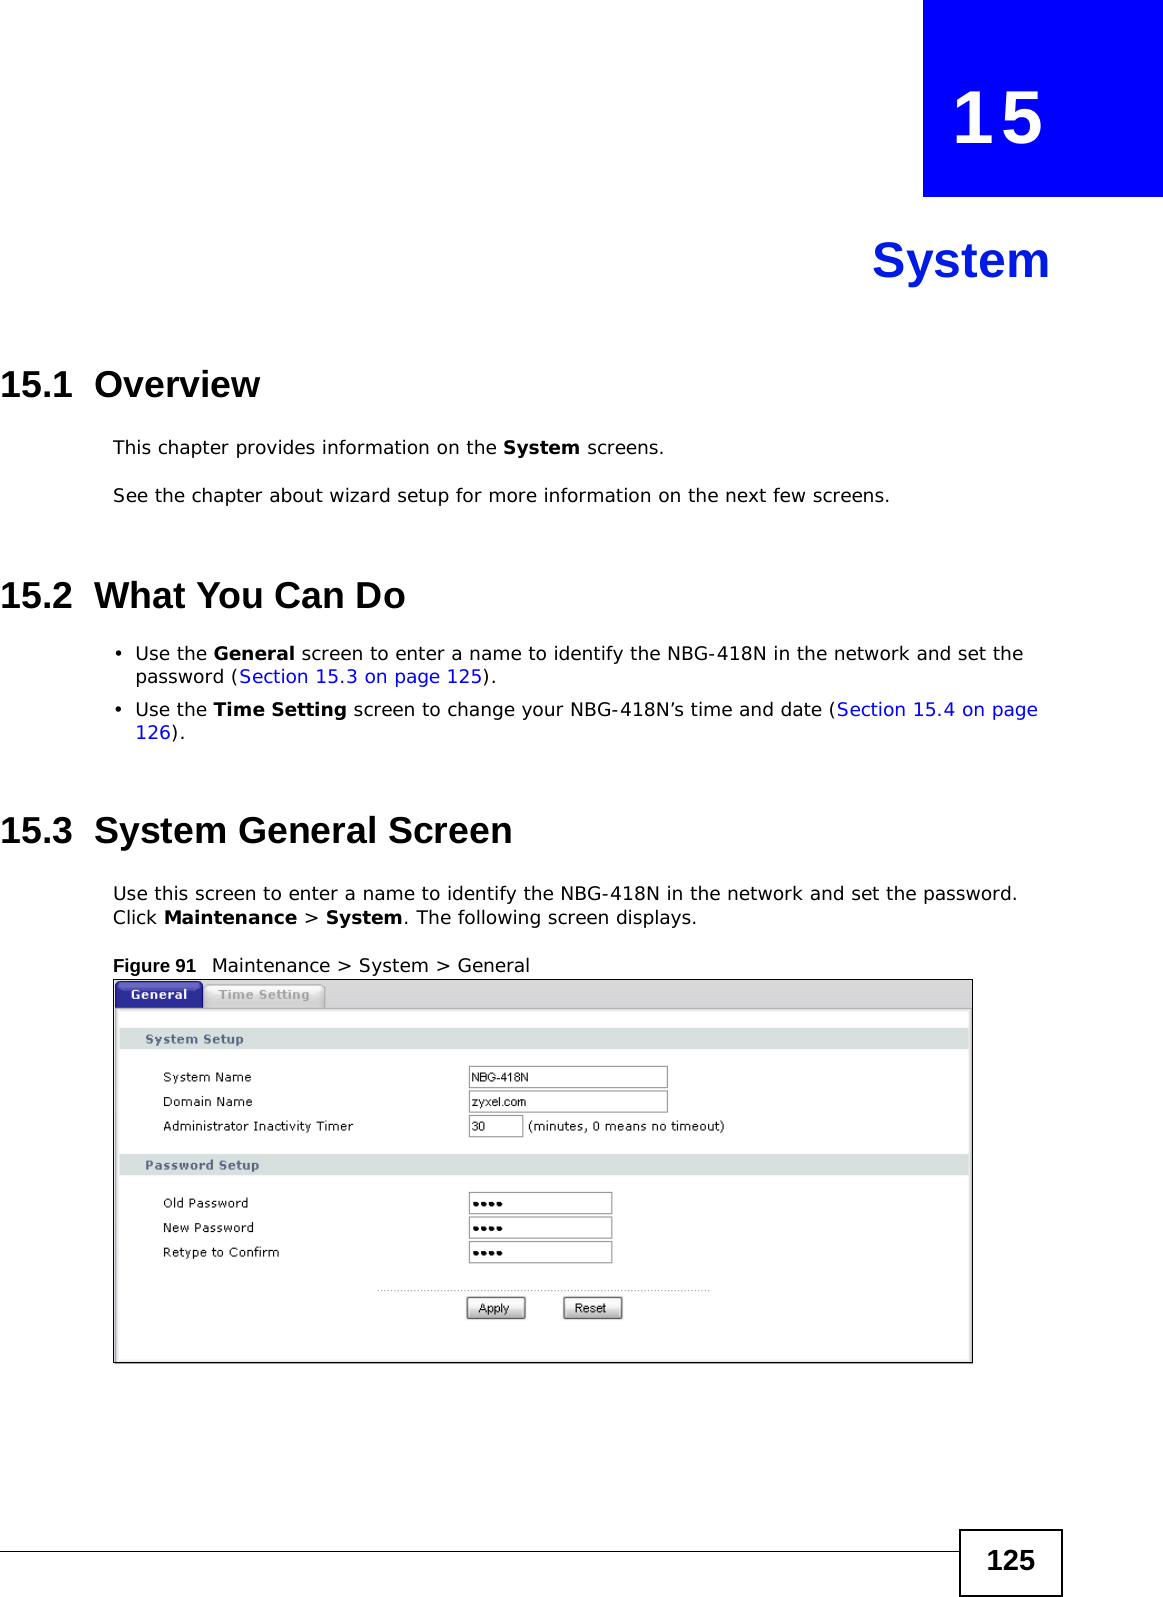 125CHAPTER   15System15.1  OverviewThis chapter provides information on the System screens. See the chapter about wizard setup for more information on the next few screens.15.2  What You Can Do•Use the General screen to enter a name to identify the NBG-418N in the network and set the password (Section 15.3 on page 125).•Use the Time Setting screen to change your NBG-418N’s time and date (Section 15.4 on page 126).15.3  System General Screen Use this screen to enter a name to identify the NBG-418N in the network and set the password. Click Maintenance &gt; System. The following screen displays.Figure 91   Maintenance &gt; System &gt; General 